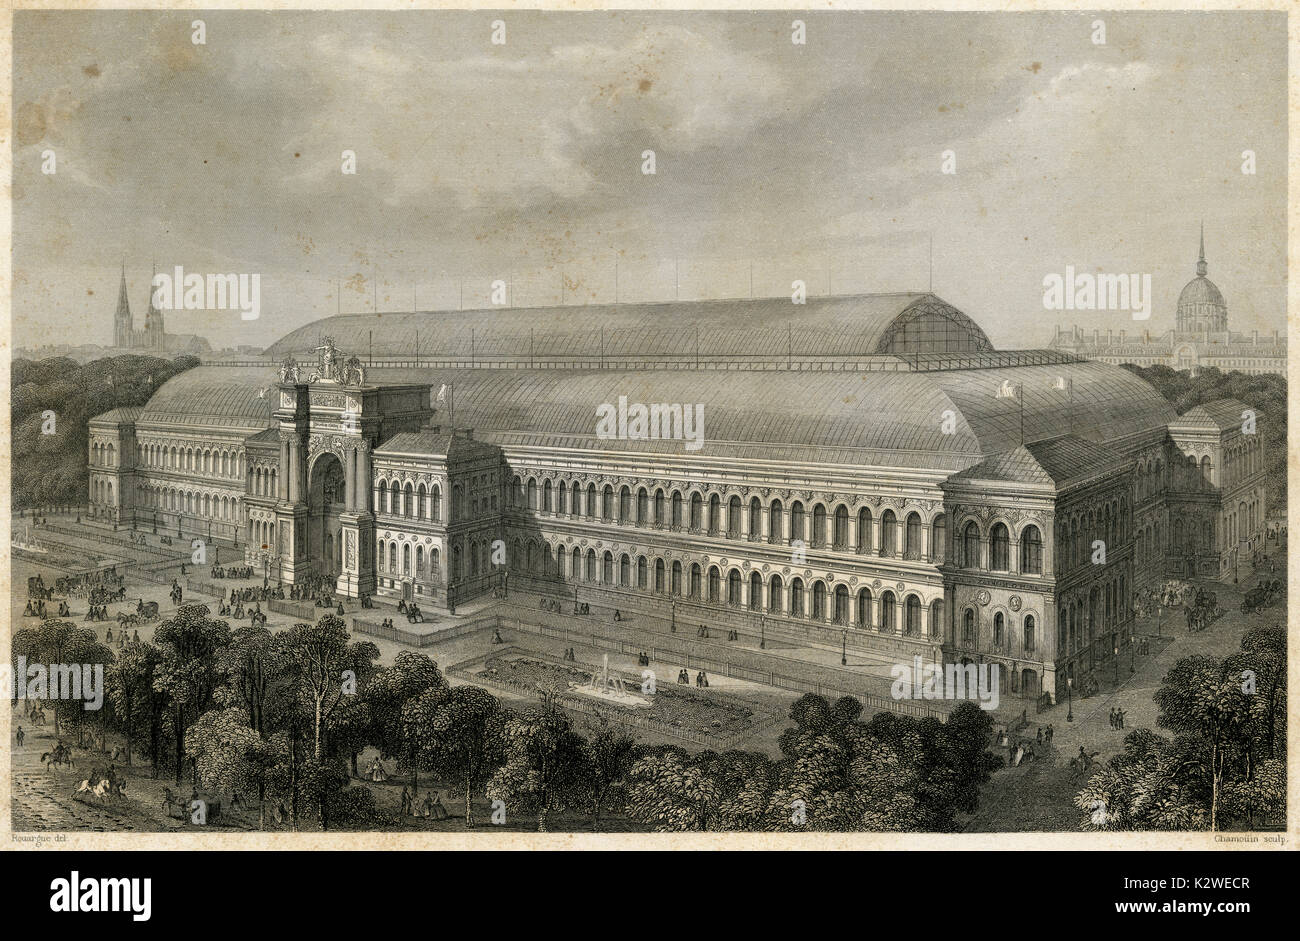 Antique c1860 engraving, Palais de l'Industrie. The Palace of Industry was an exhibition hall located between the Seine River and the Champs-ƒlysŽes, which was erected for the Paris World Fair in 1855. Mainly designed by the architect Jean-Marie-Victor Viel and the engineer Alexis Barrault. SOURCE: ORIGINAL STEEL ENGRAVING. Stock Photo